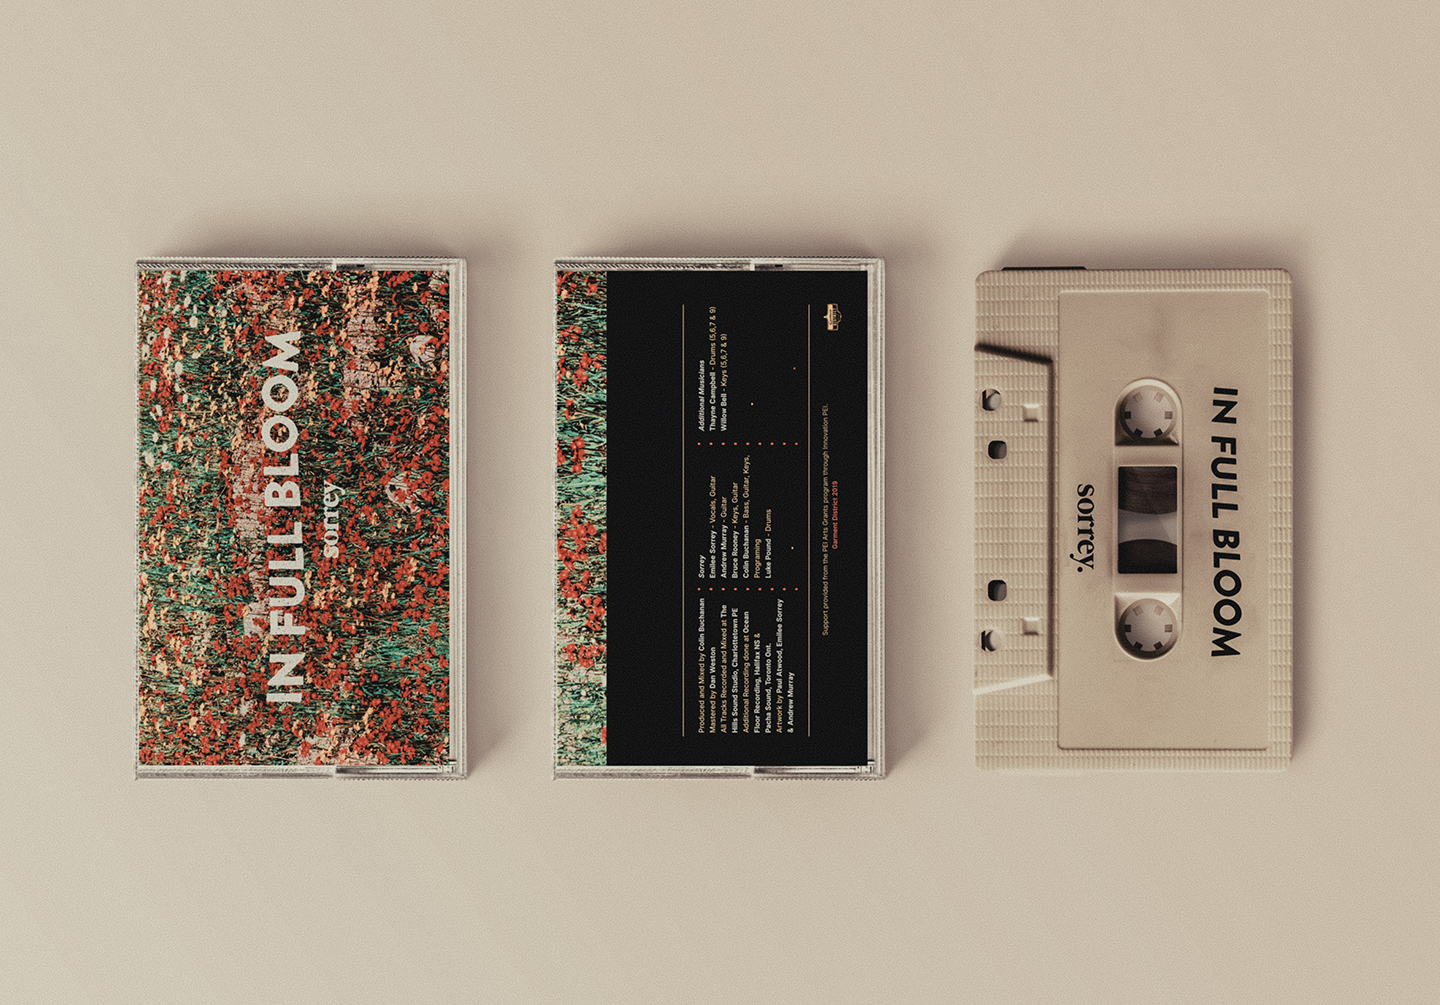 In Full Bloom - Sorrey cassette. Artwork layout and design by Paul Atwood.